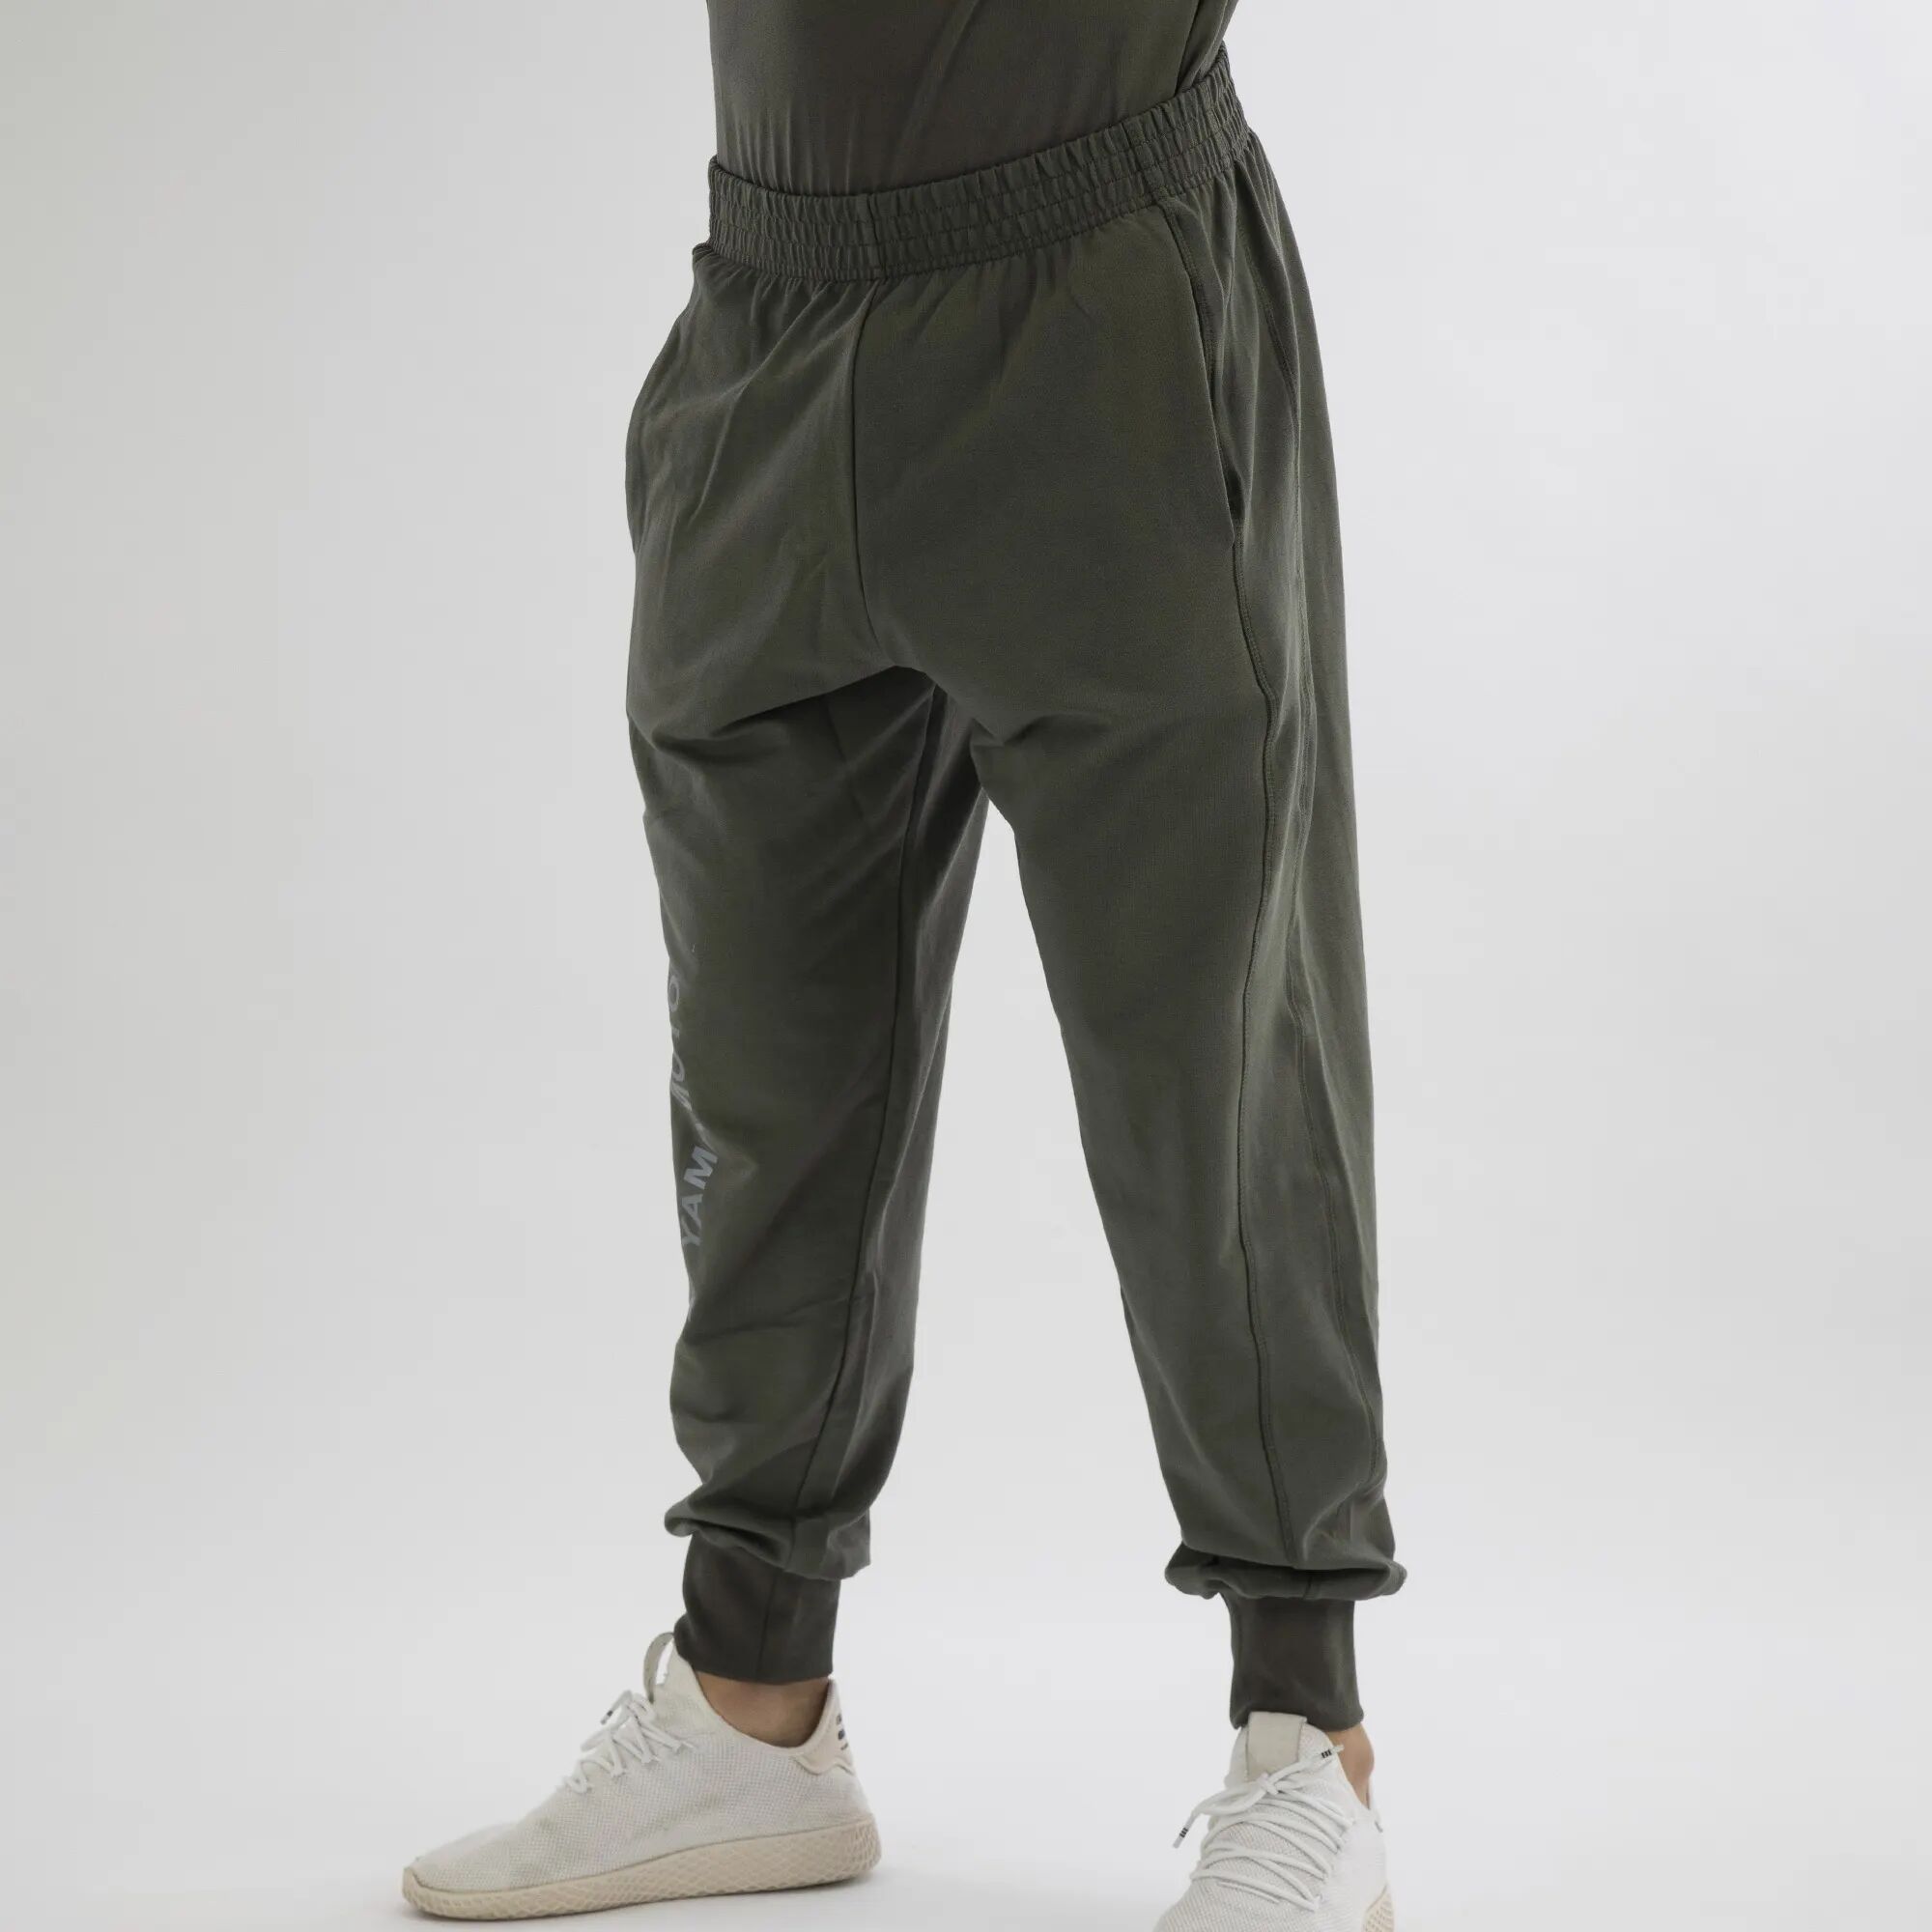 YAMAMOTO OUTFIT Man Pants LP Colore: Verde Oliva 